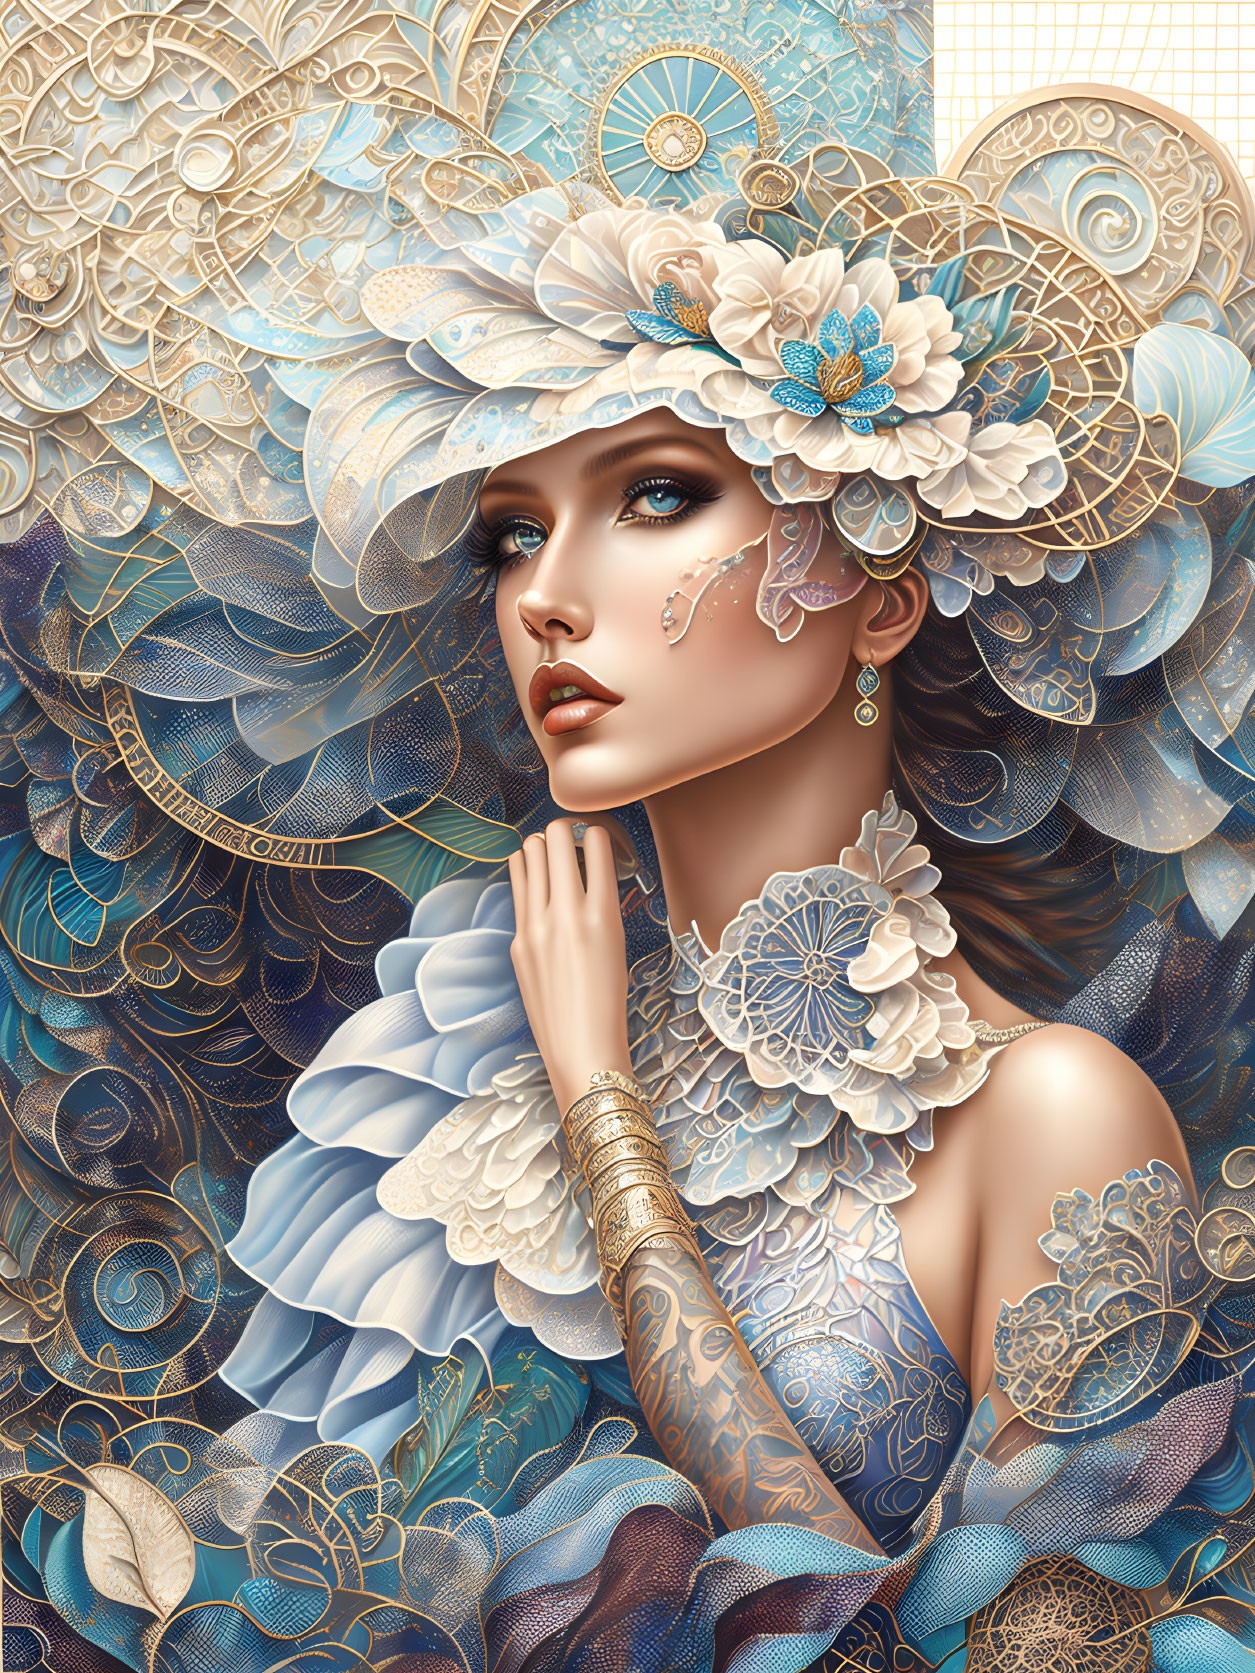 Intricate floral hat and lace details on woman portrait with ornate tattoos